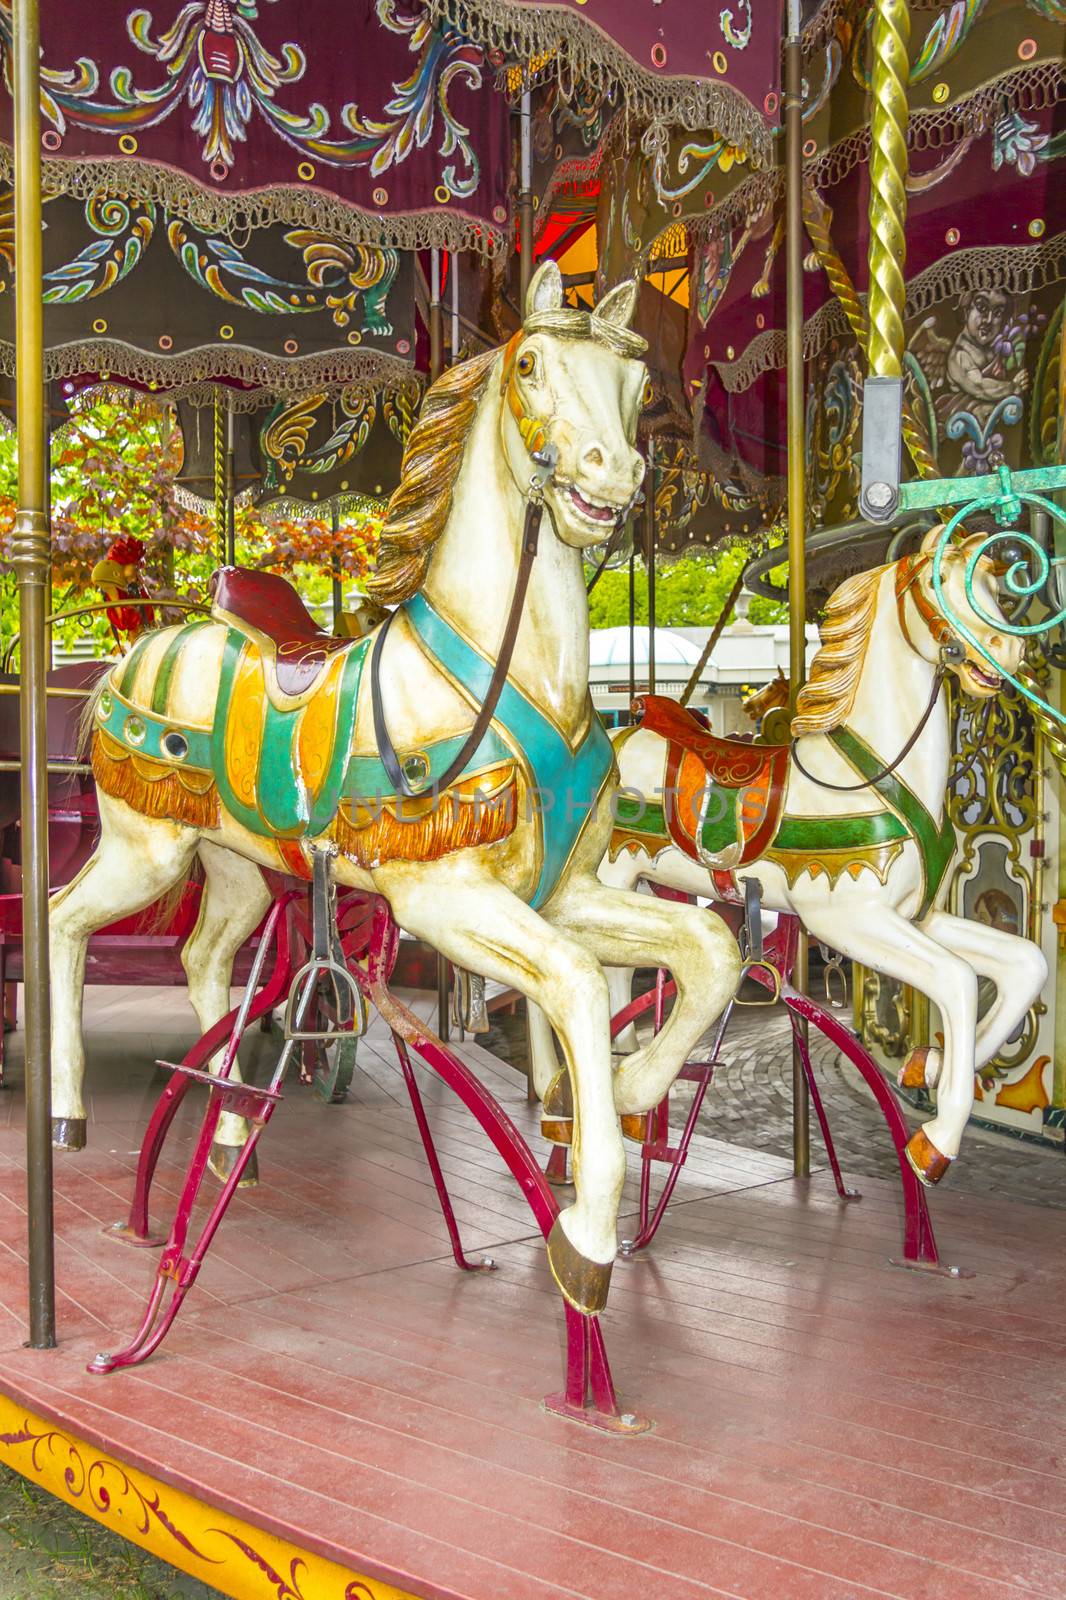 Two colourful horses in a vintage (old fashioned) carousel by Tetyana